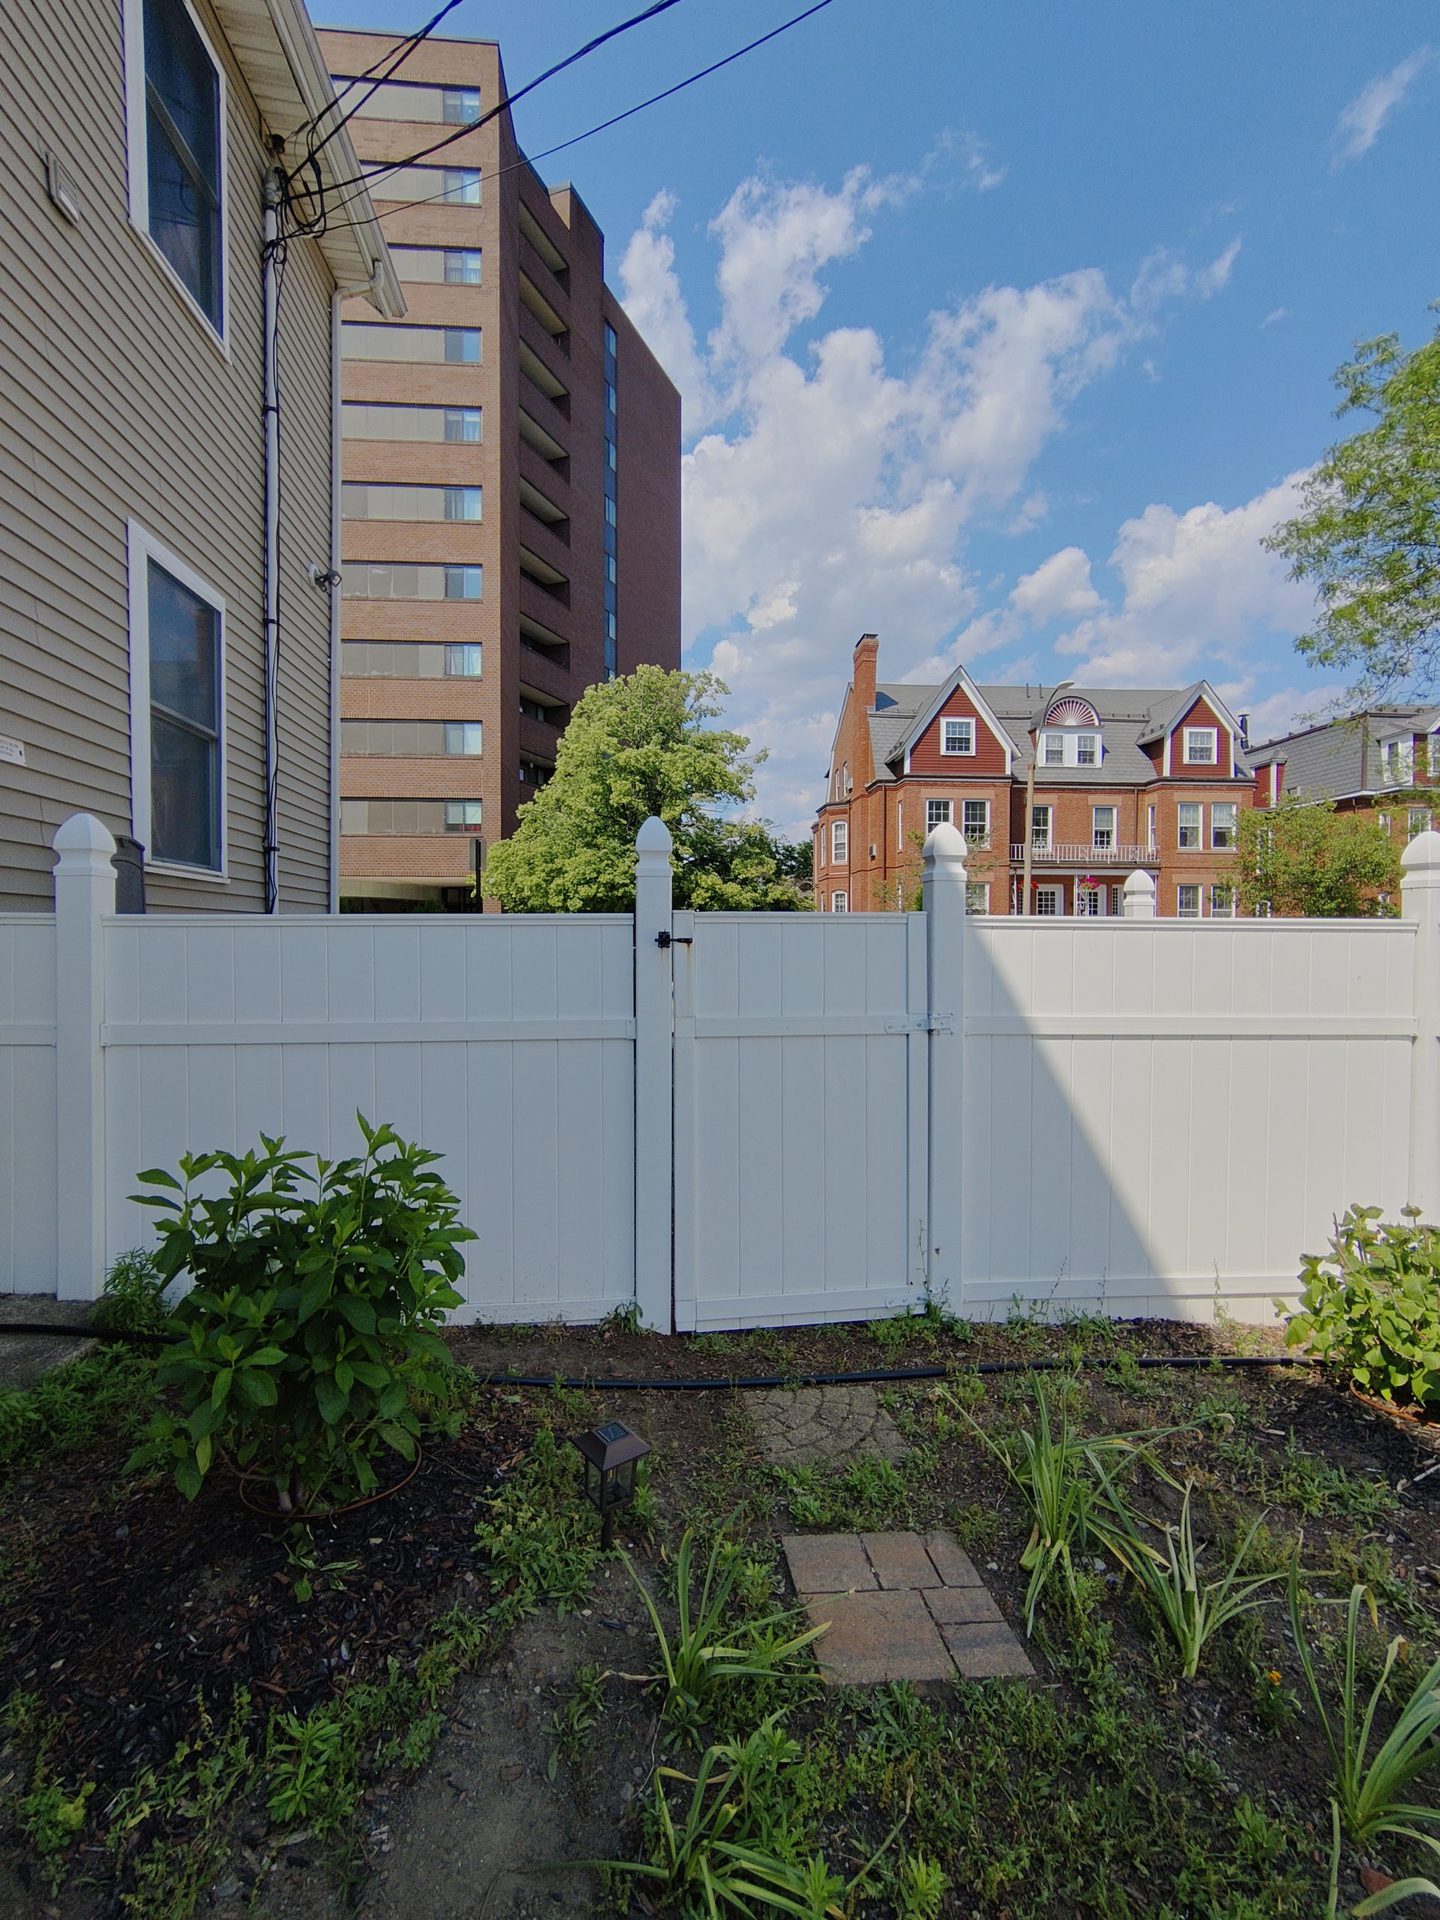 TCL 20 Pro 5G Ultrawide Camera shot of a garden and a white painted fence, with buildings visible in the distance.